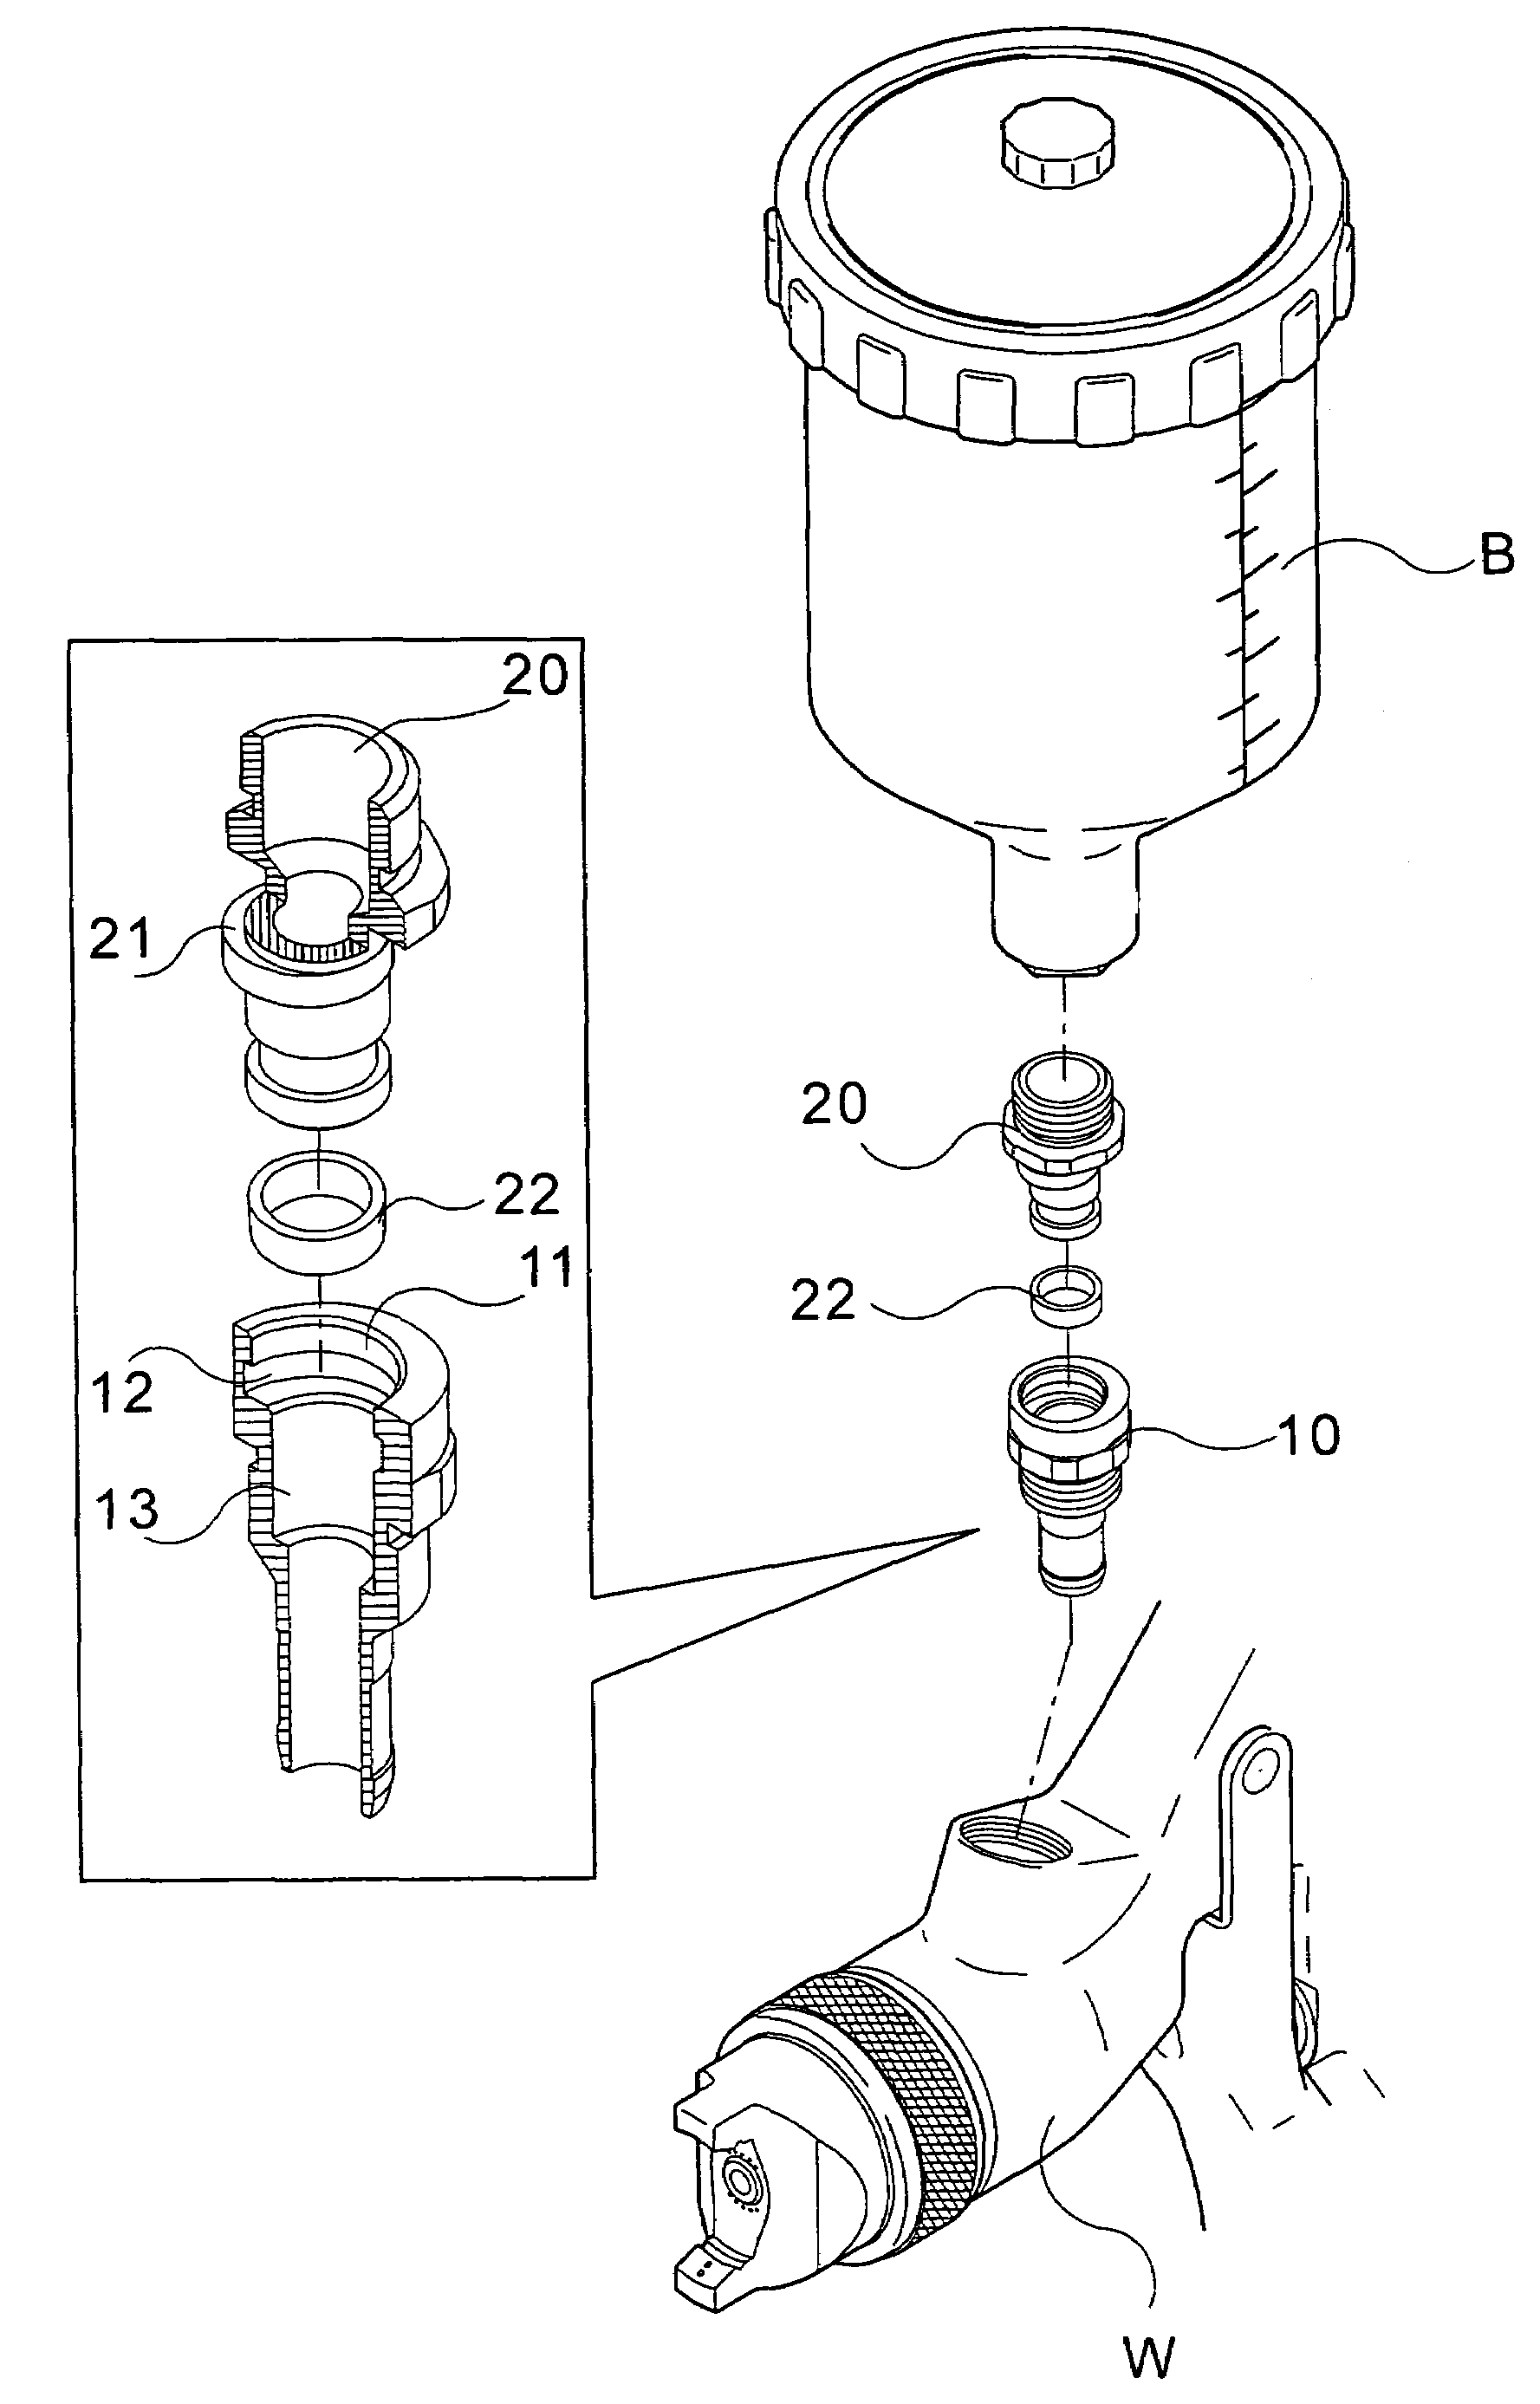 Connection of cup and paint sprayer